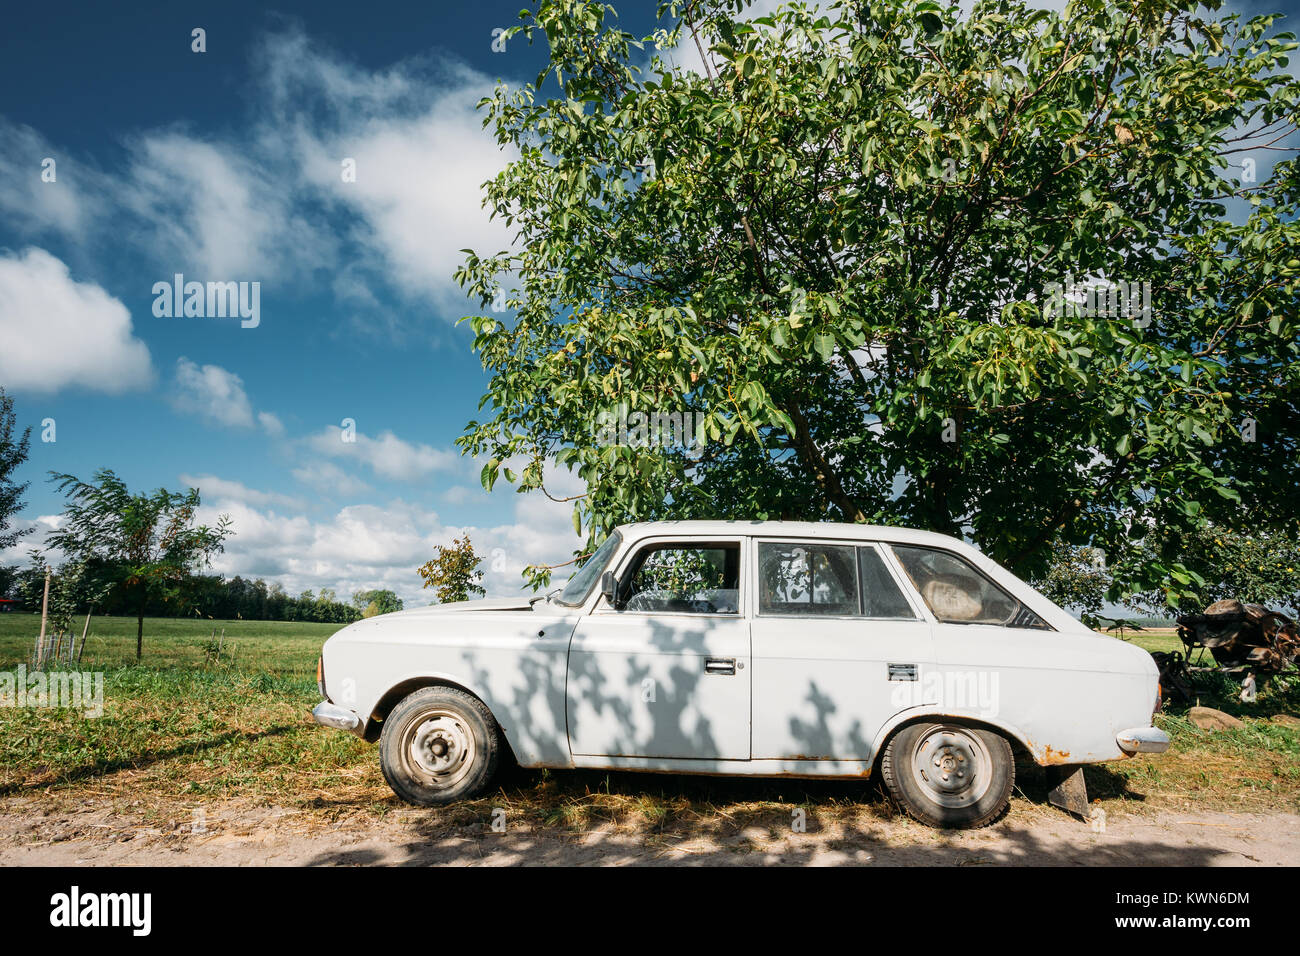 Old White Izh 21251 Kombi Parking On A Roadside Of Country Road On A Background Of Green Tree And Meadow In Sunny Day With Blue Sky. Stock Photo